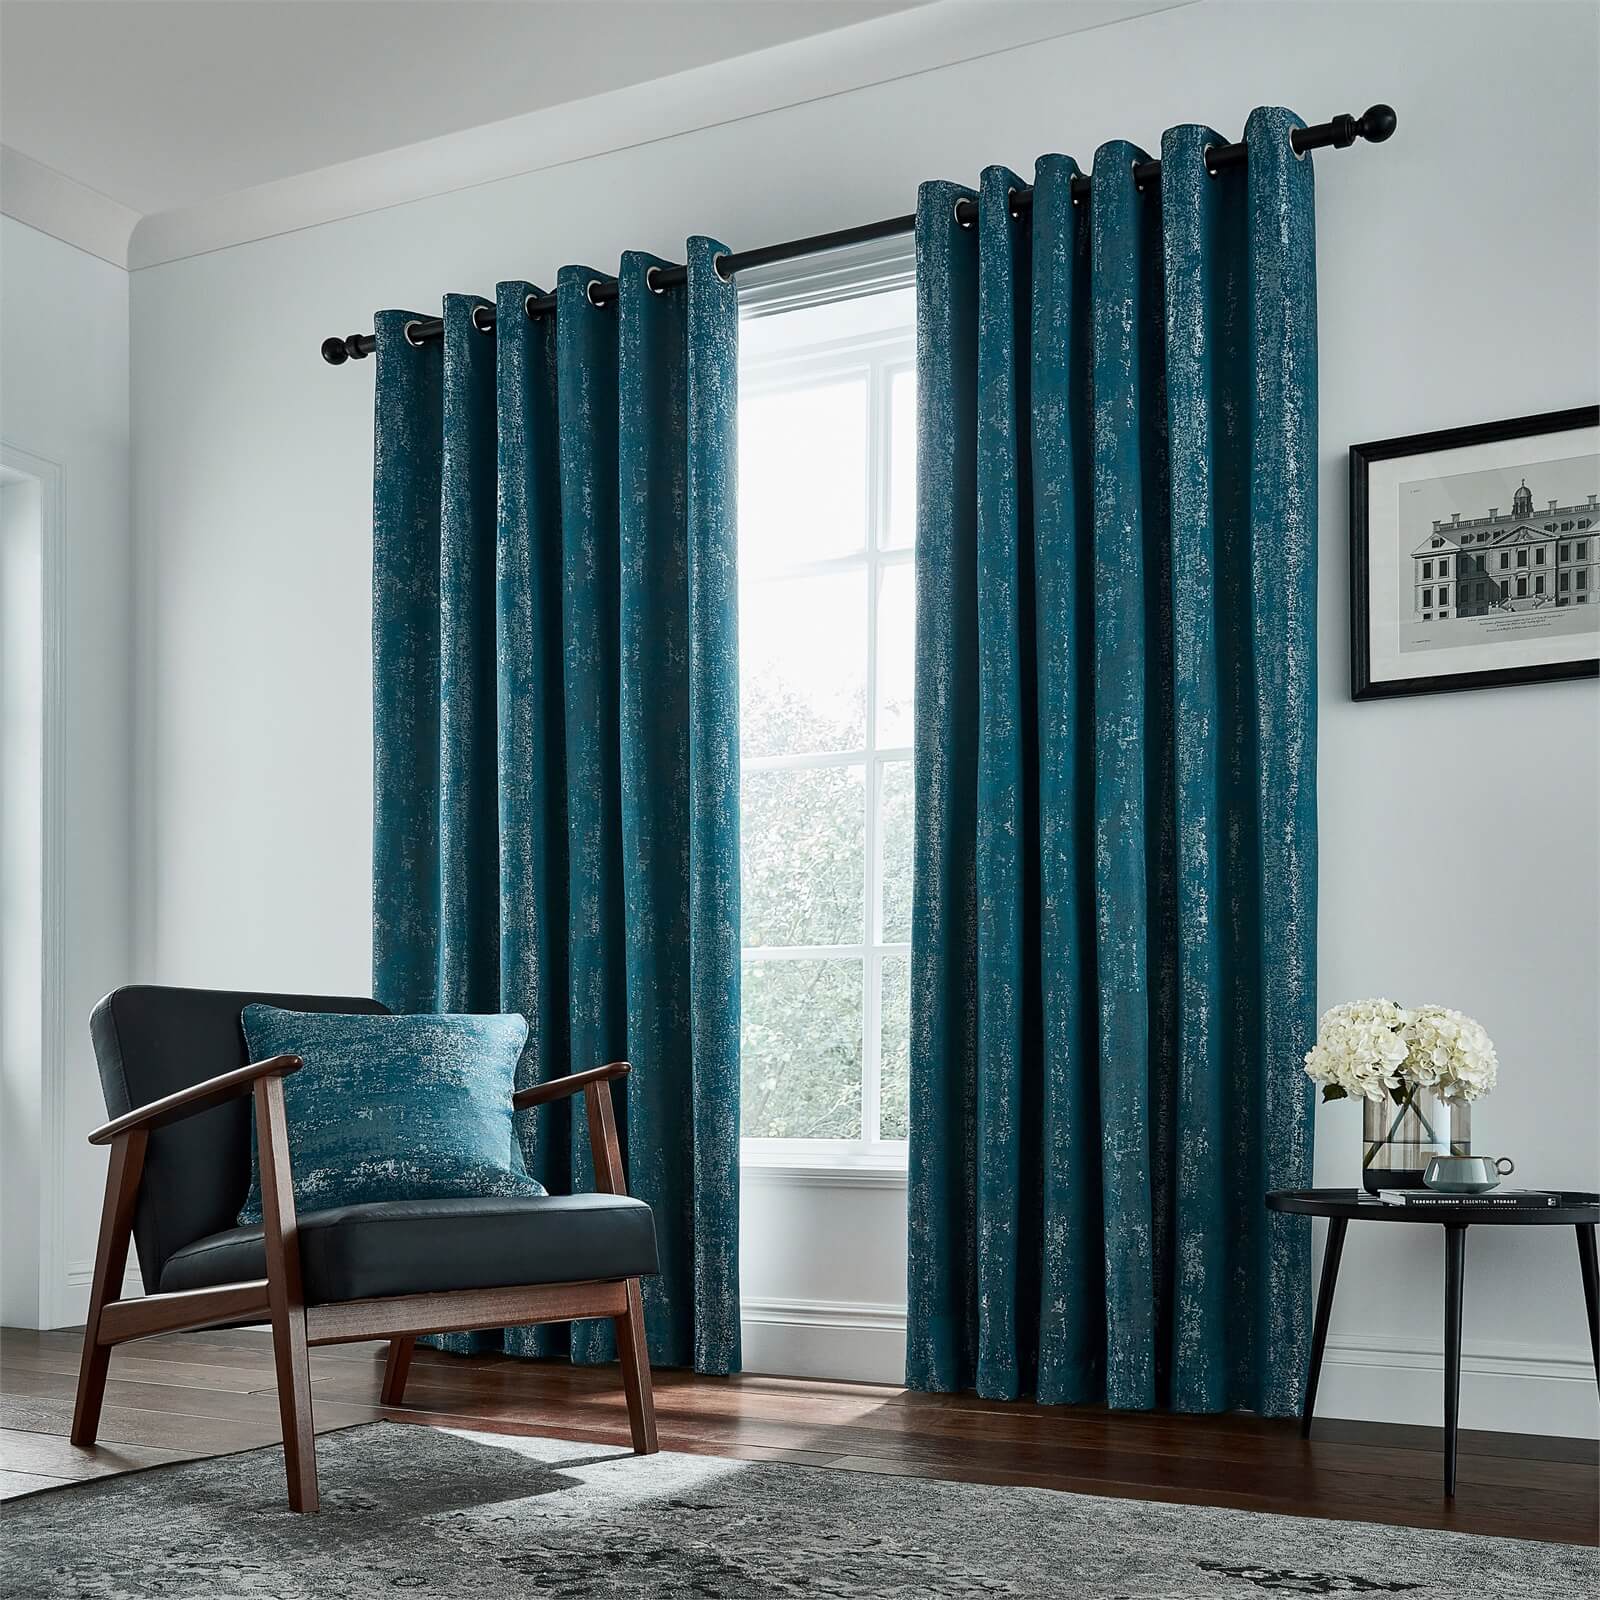 Peacock Blue Hotel Collection Roma Lined Curtains 90 x 54 - Emerald